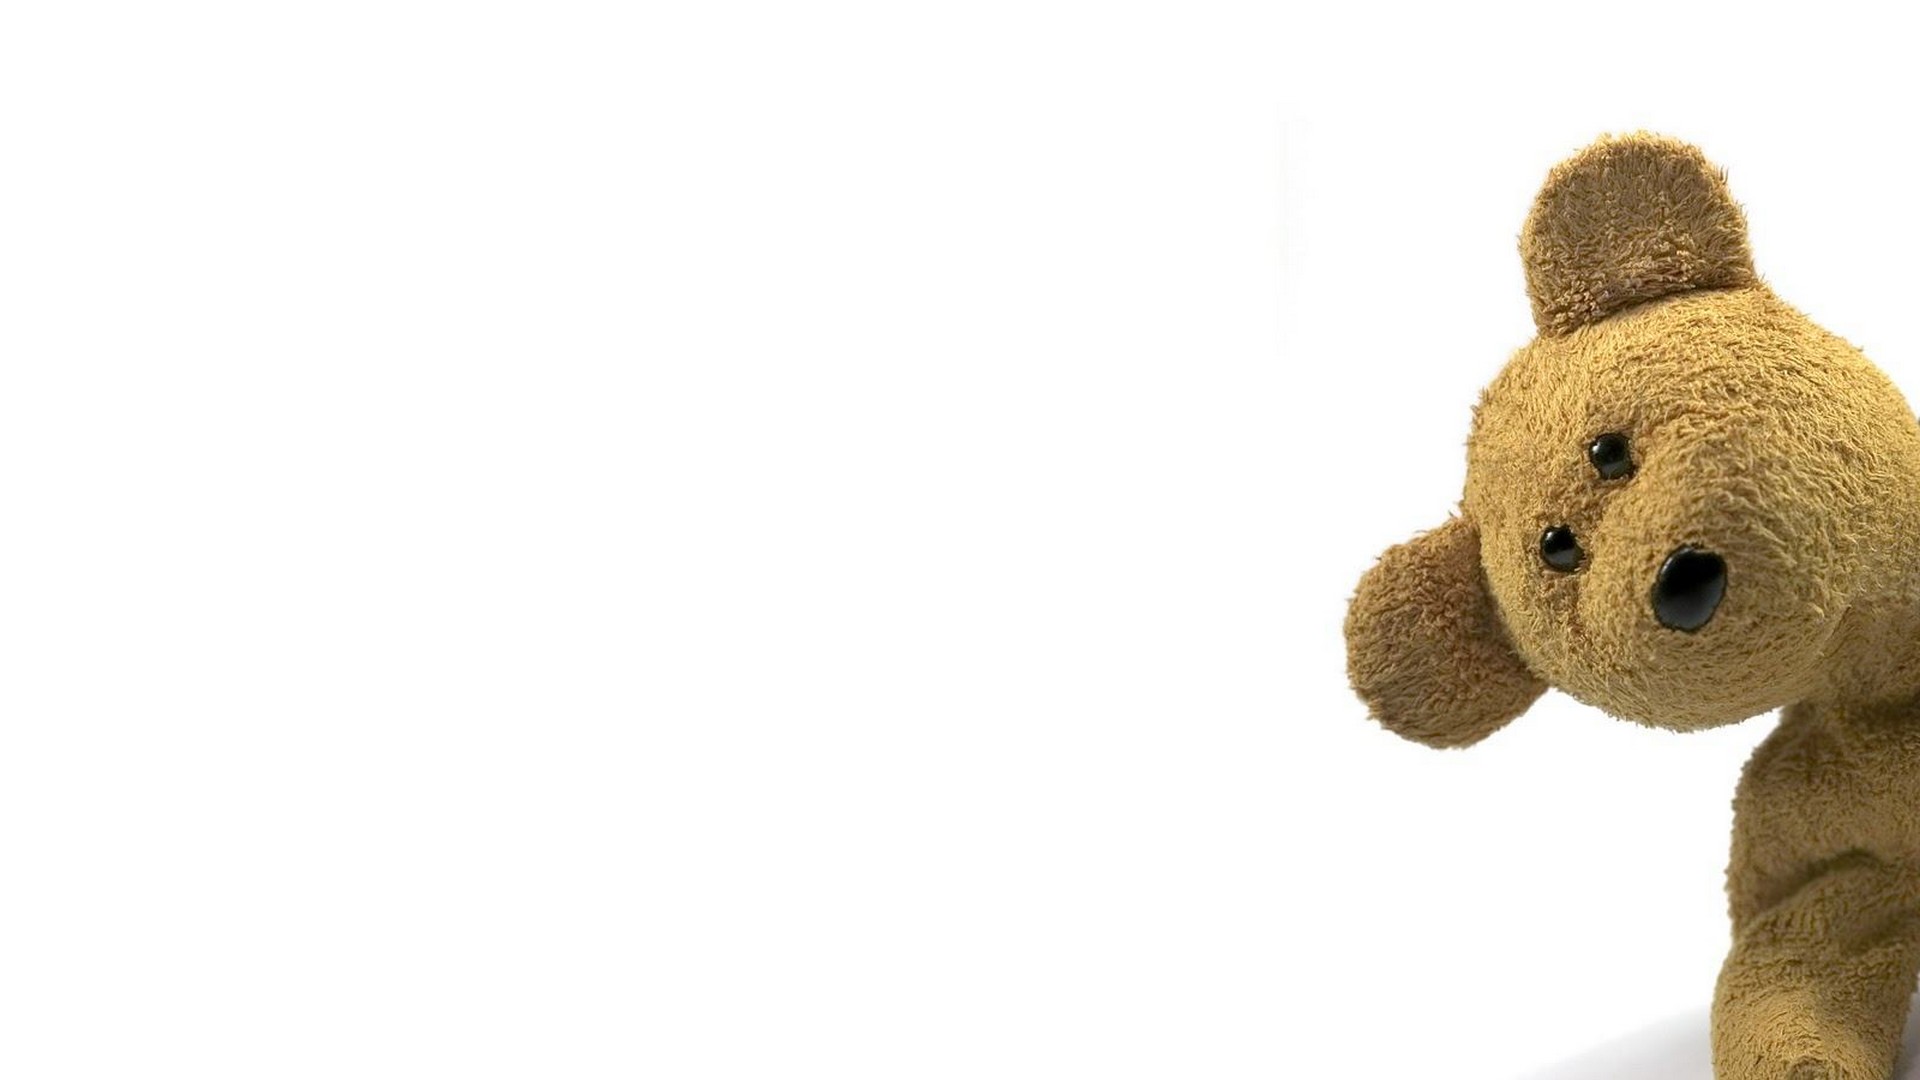 Big Teddy Bear Background Wallpaper HD with image resolution 1920x1080 pixel. You can make this wallpaper for your Desktop Computer Backgrounds, Mac Wallpapers, Android Lock screen or iPhone Screensavers